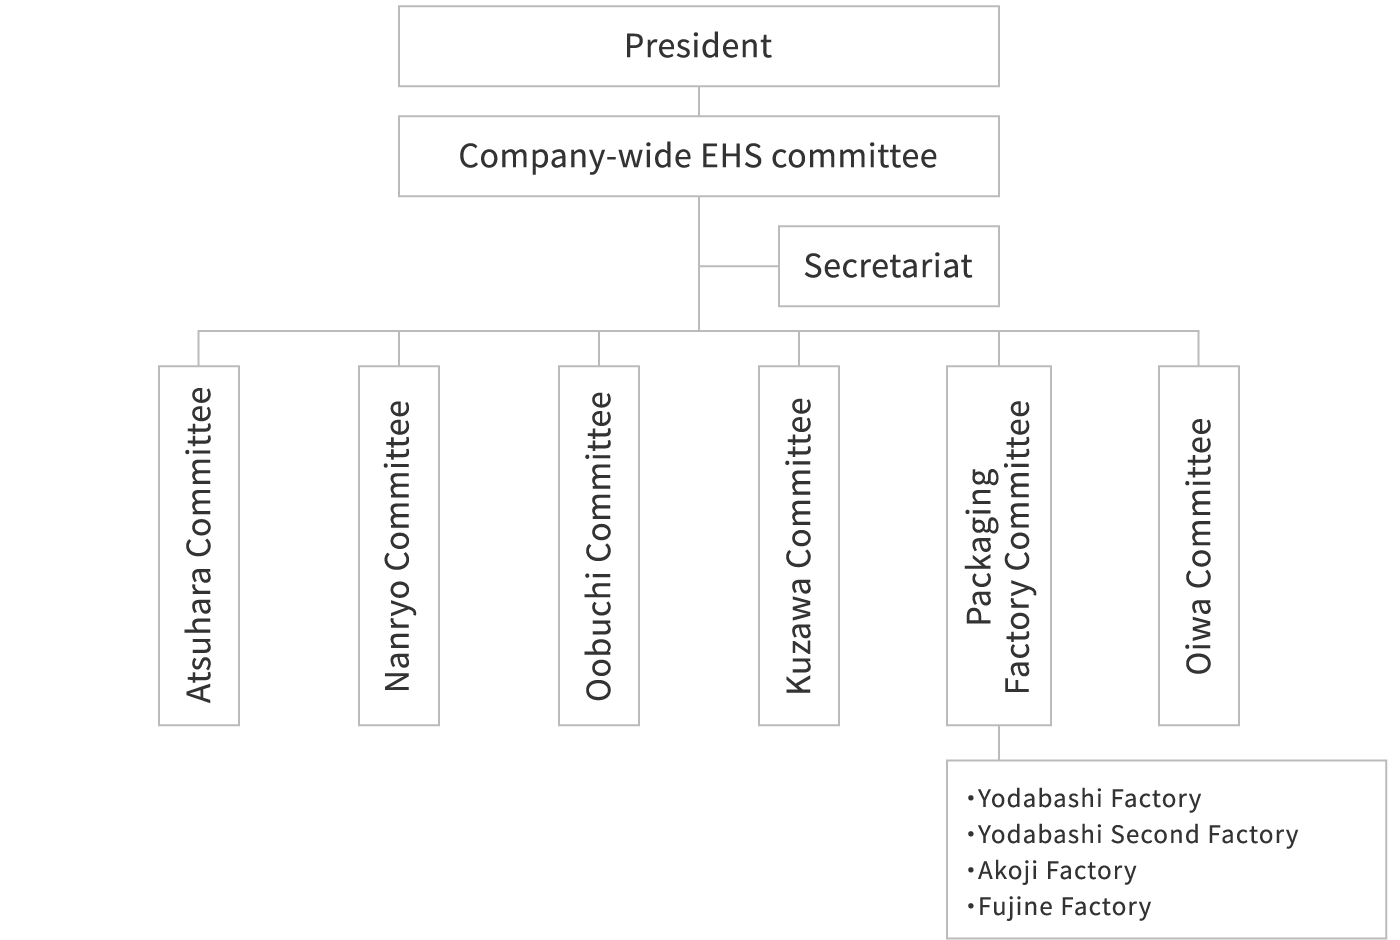 Company-wide EHS committee organization chart